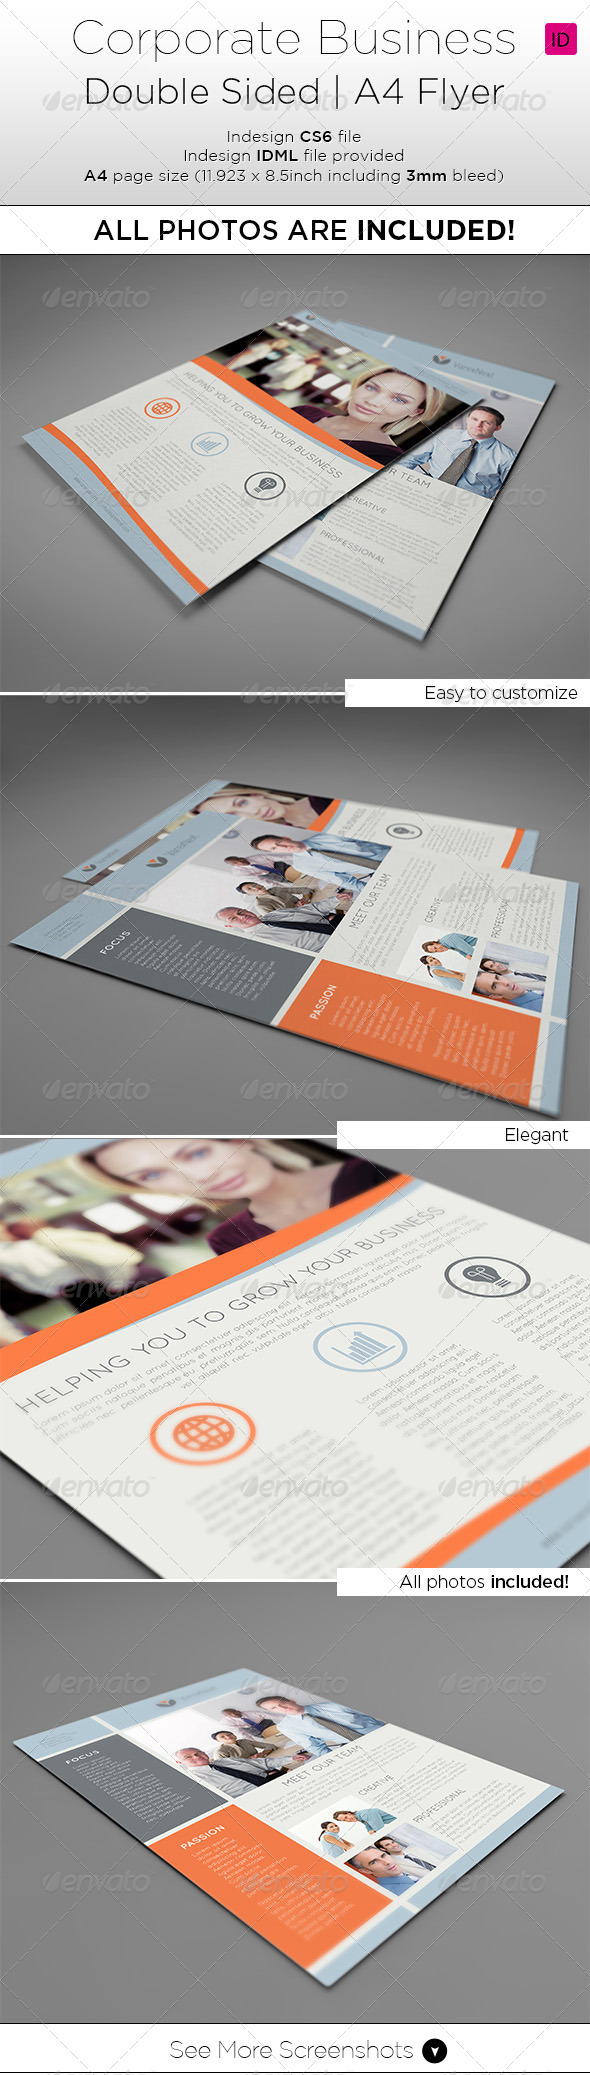 Corporate Double Sided Flyer